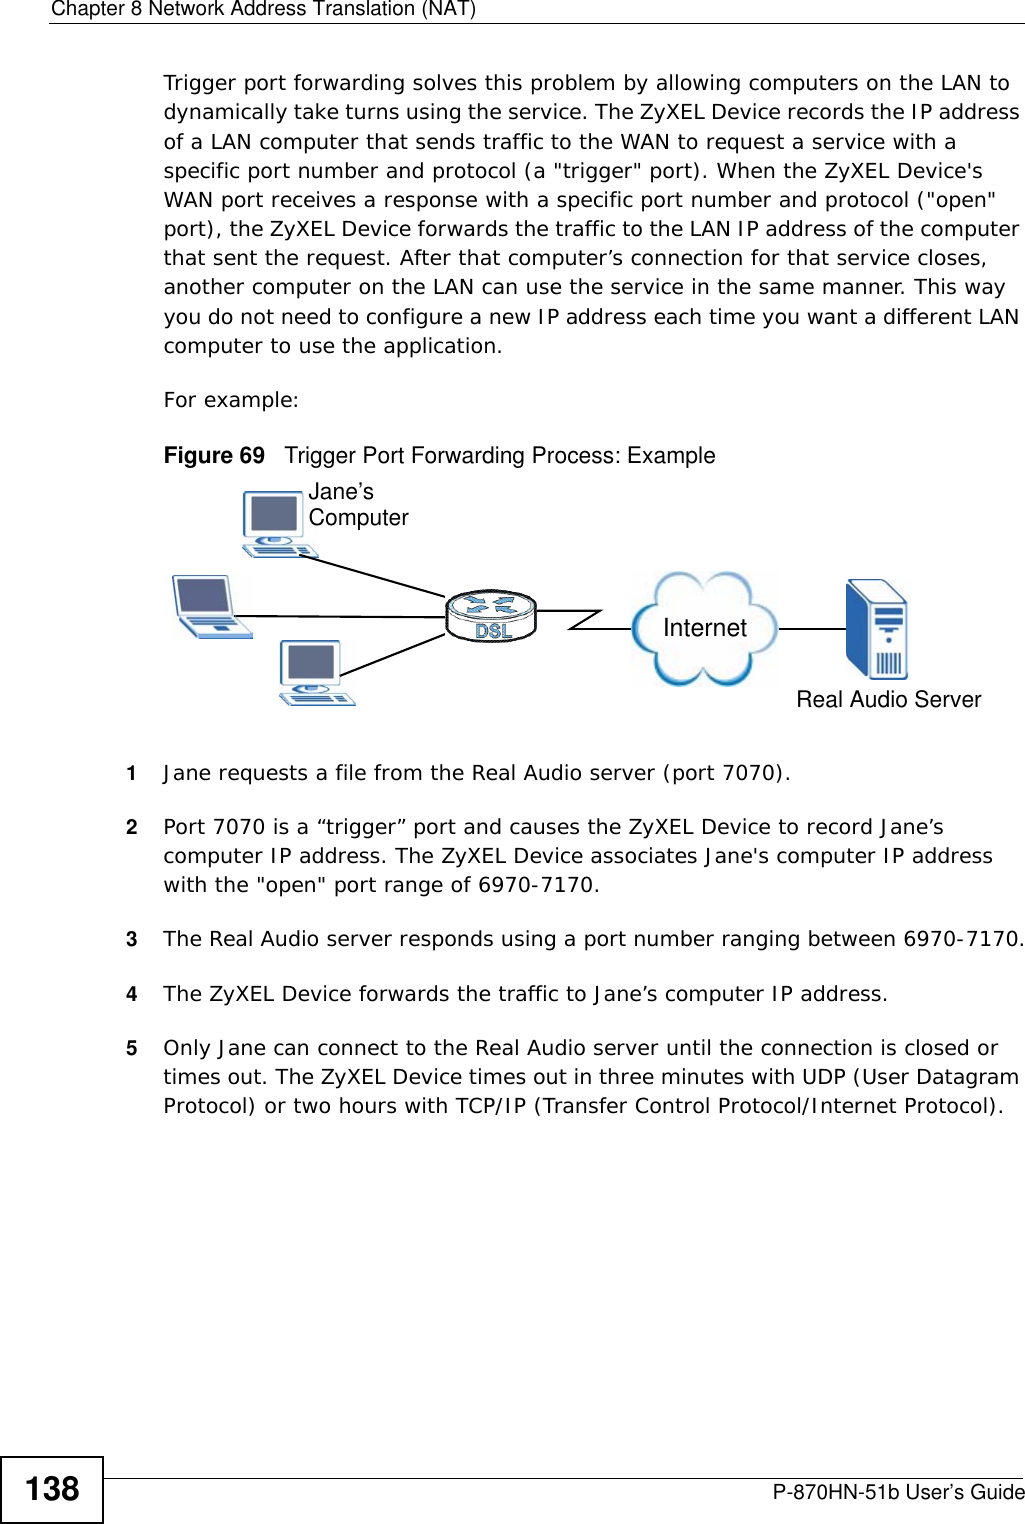 Chapter 8 Network Address Translation (NAT)P-870HN-51b User’s Guide138Trigger port forwarding solves this problem by allowing computers on the LAN to dynamically take turns using the service. The ZyXEL Device records the IP address of a LAN computer that sends traffic to the WAN to request a service with a specific port number and protocol (a &quot;trigger&quot; port). When the ZyXEL Device&apos;s WAN port receives a response with a specific port number and protocol (&quot;open&quot; port), the ZyXEL Device forwards the traffic to the LAN IP address of the computer that sent the request. After that computer’s connection for that service closes, another computer on the LAN can use the service in the same manner. This way you do not need to configure a new IP address each time you want a different LAN computer to use the application.For example:Figure 69   Trigger Port Forwarding Process: Example1Jane requests a file from the Real Audio server (port 7070).2Port 7070 is a “trigger” port and causes the ZyXEL Device to record Jane’s computer IP address. The ZyXEL Device associates Jane&apos;s computer IP address with the &quot;open&quot; port range of 6970-7170.3The Real Audio server responds using a port number ranging between 6970-7170.4The ZyXEL Device forwards the traffic to Jane’s computer IP address. 5Only Jane can connect to the Real Audio server until the connection is closed or times out. The ZyXEL Device times out in three minutes with UDP (User Datagram Protocol) or two hours with TCP/IP (Transfer Control Protocol/Internet Protocol). Jane’sComputerInternetReal Audio Server